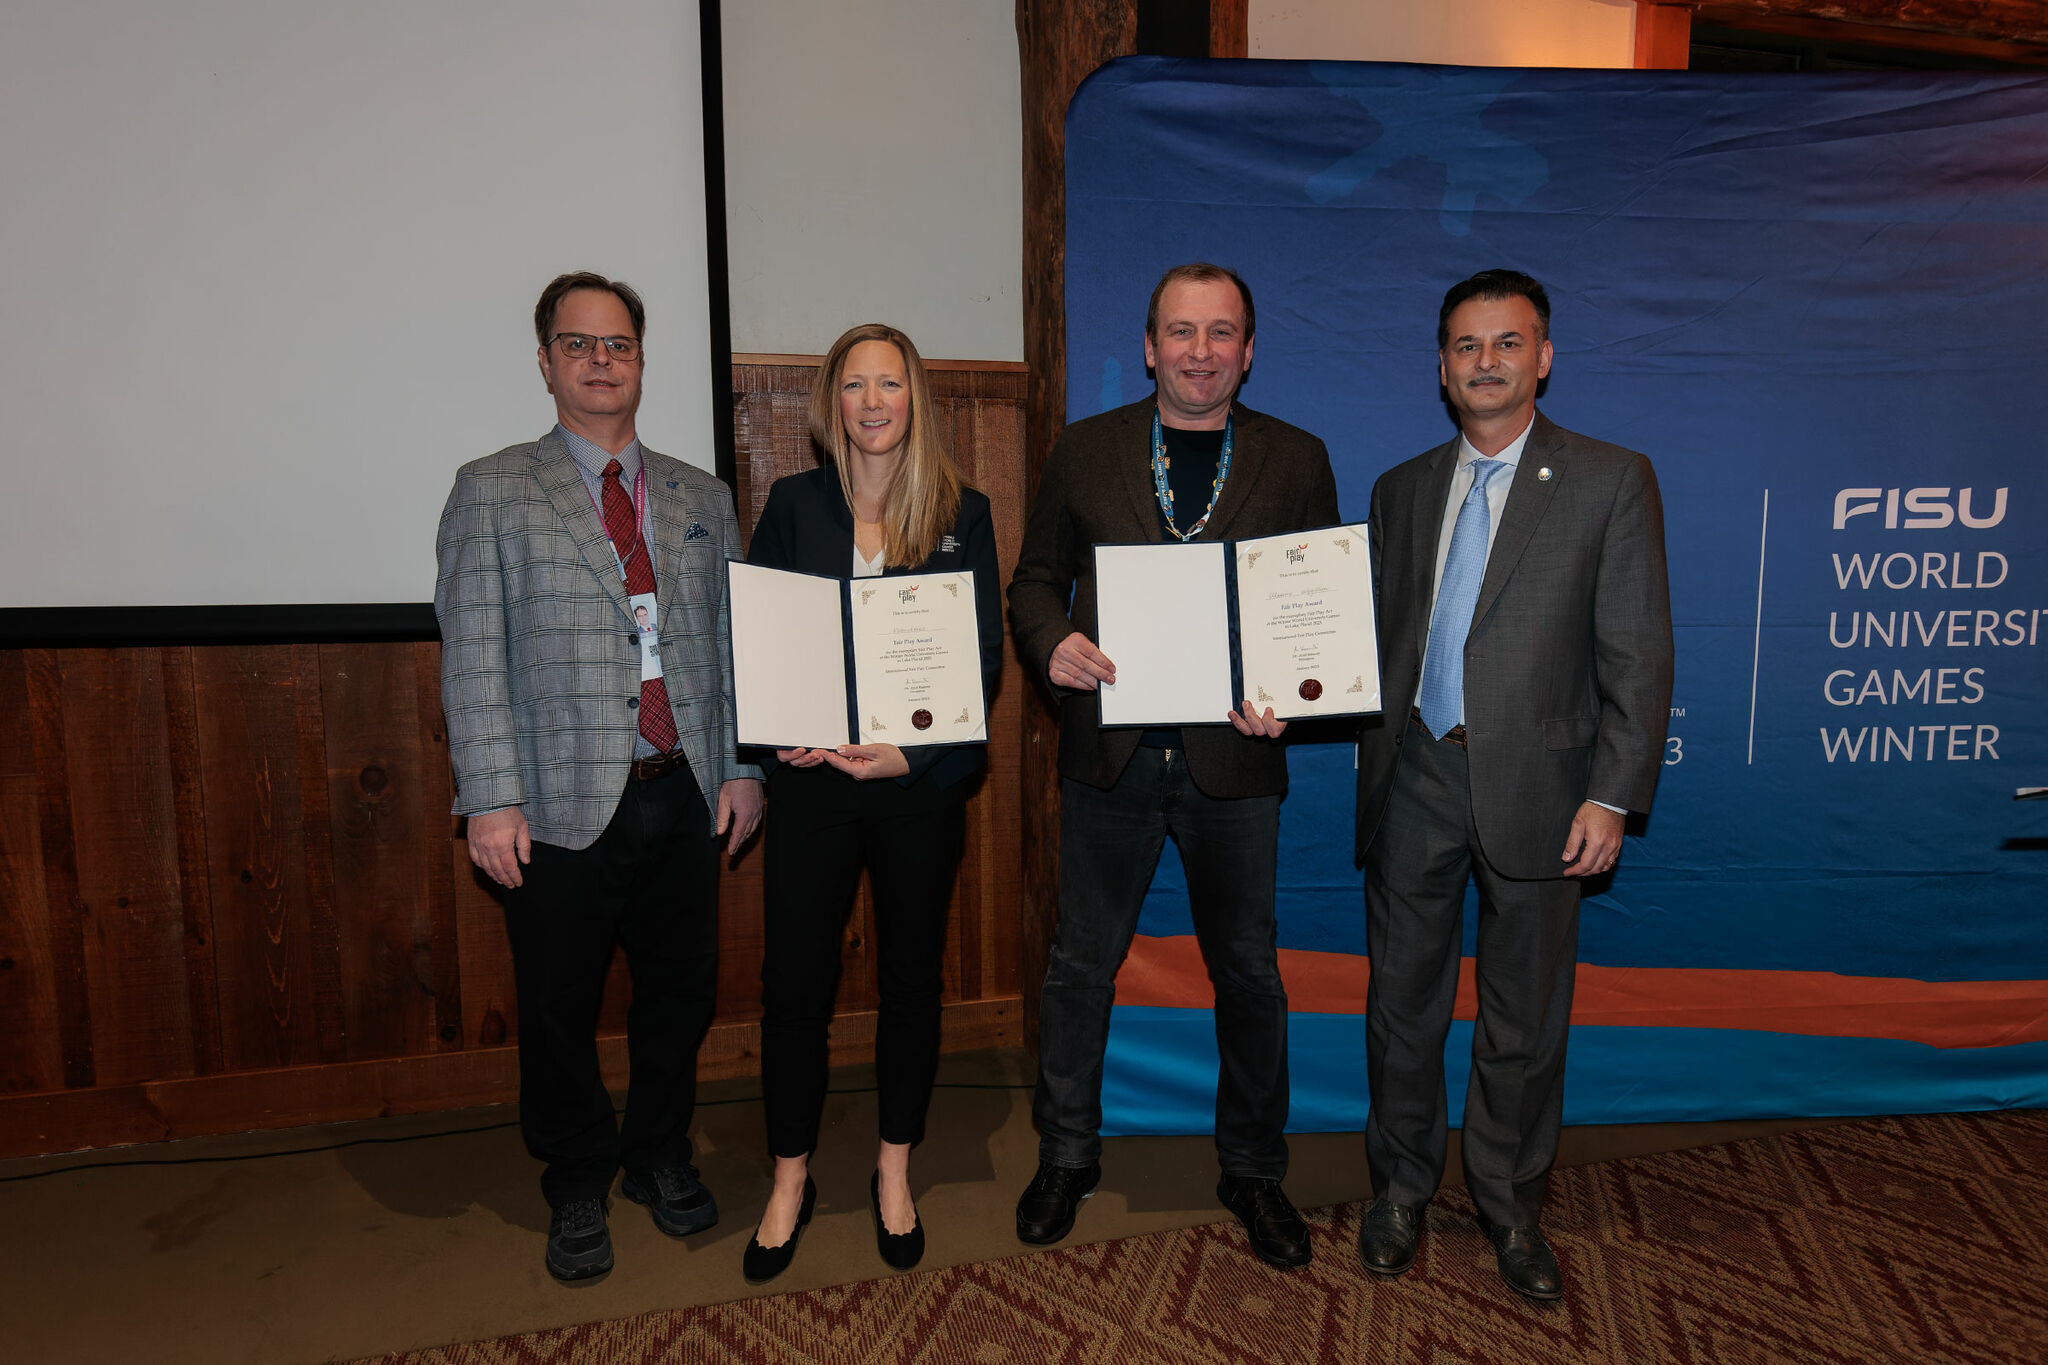 Lake Placid 2023 executive director Ashley Walden, second left, also received an award on behalf of all of the volunteers that helped to stage the Games ©FISU